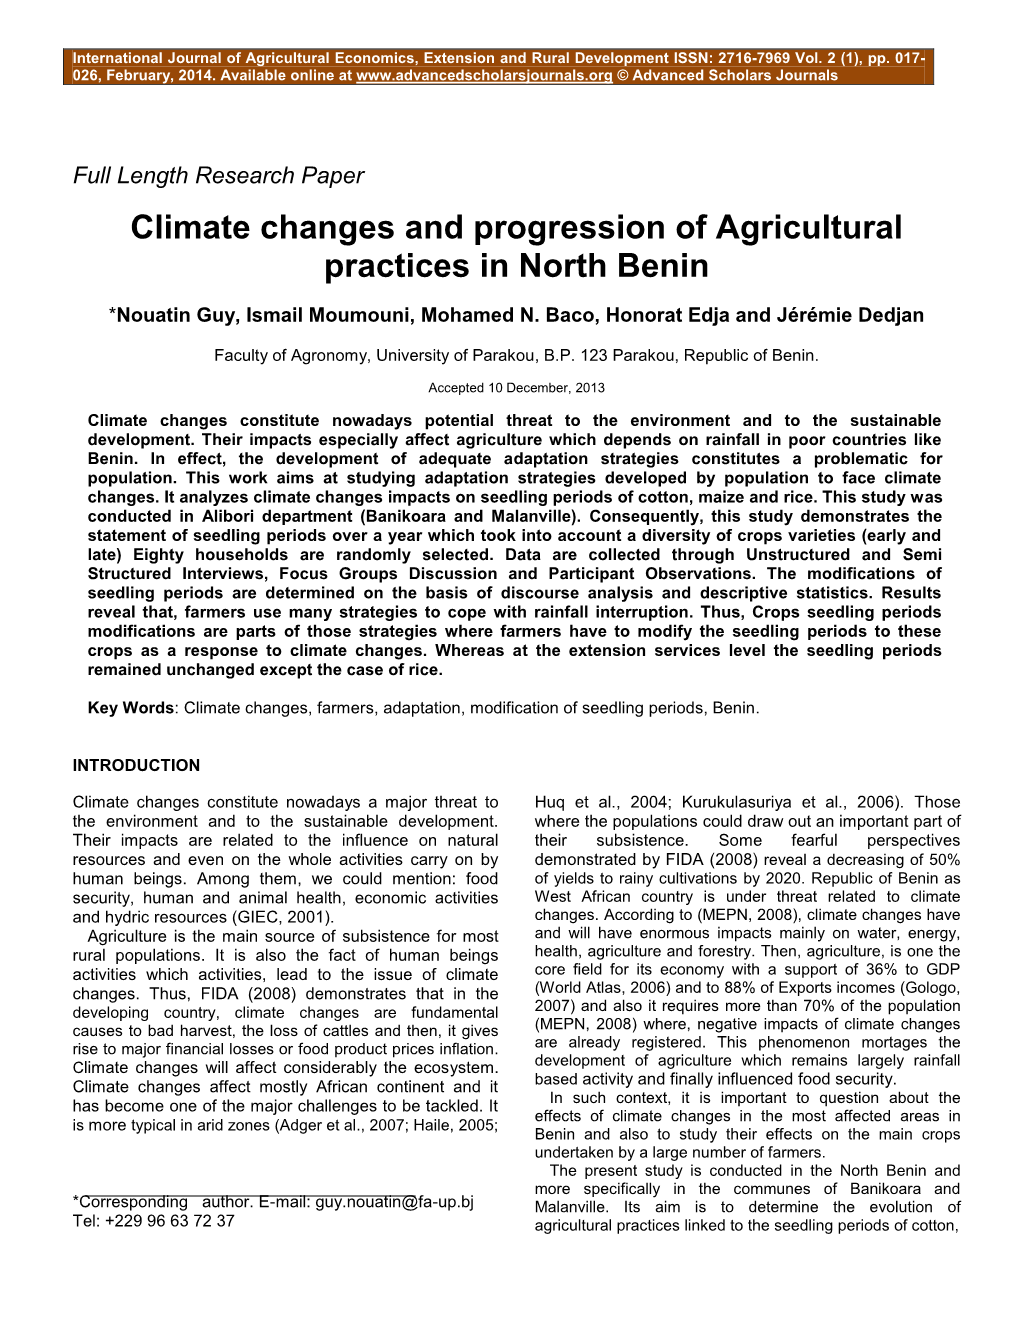 Climate Changes and Progression of Agricultural Practices in North Benin